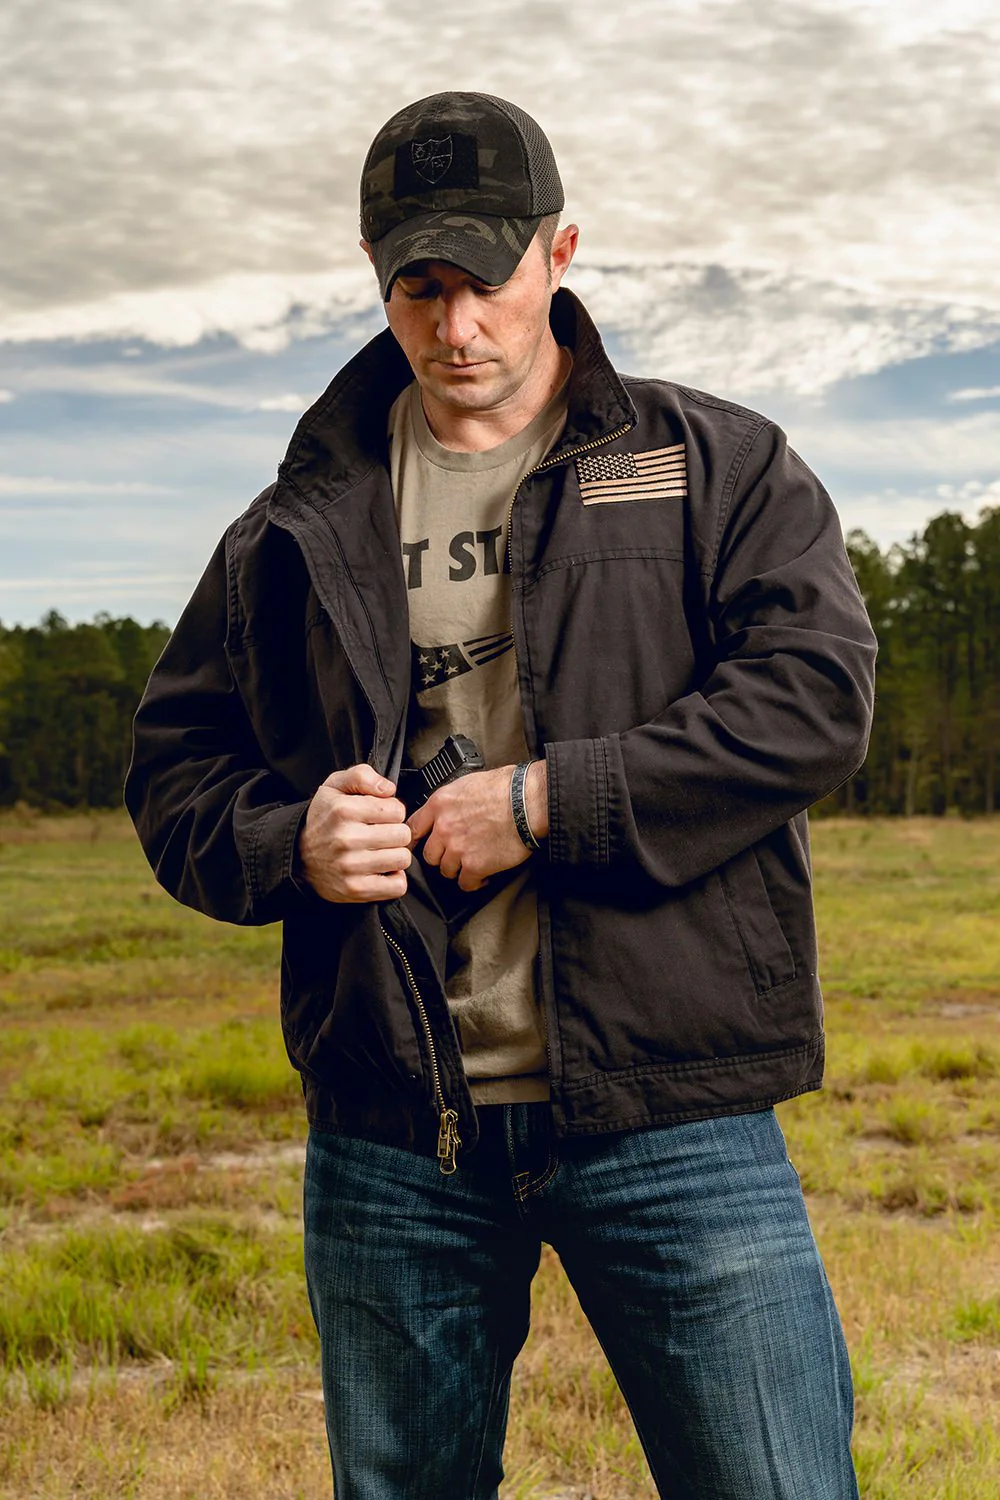 The Benefits of Investing in a High-Quality Concealed Carry Jacket